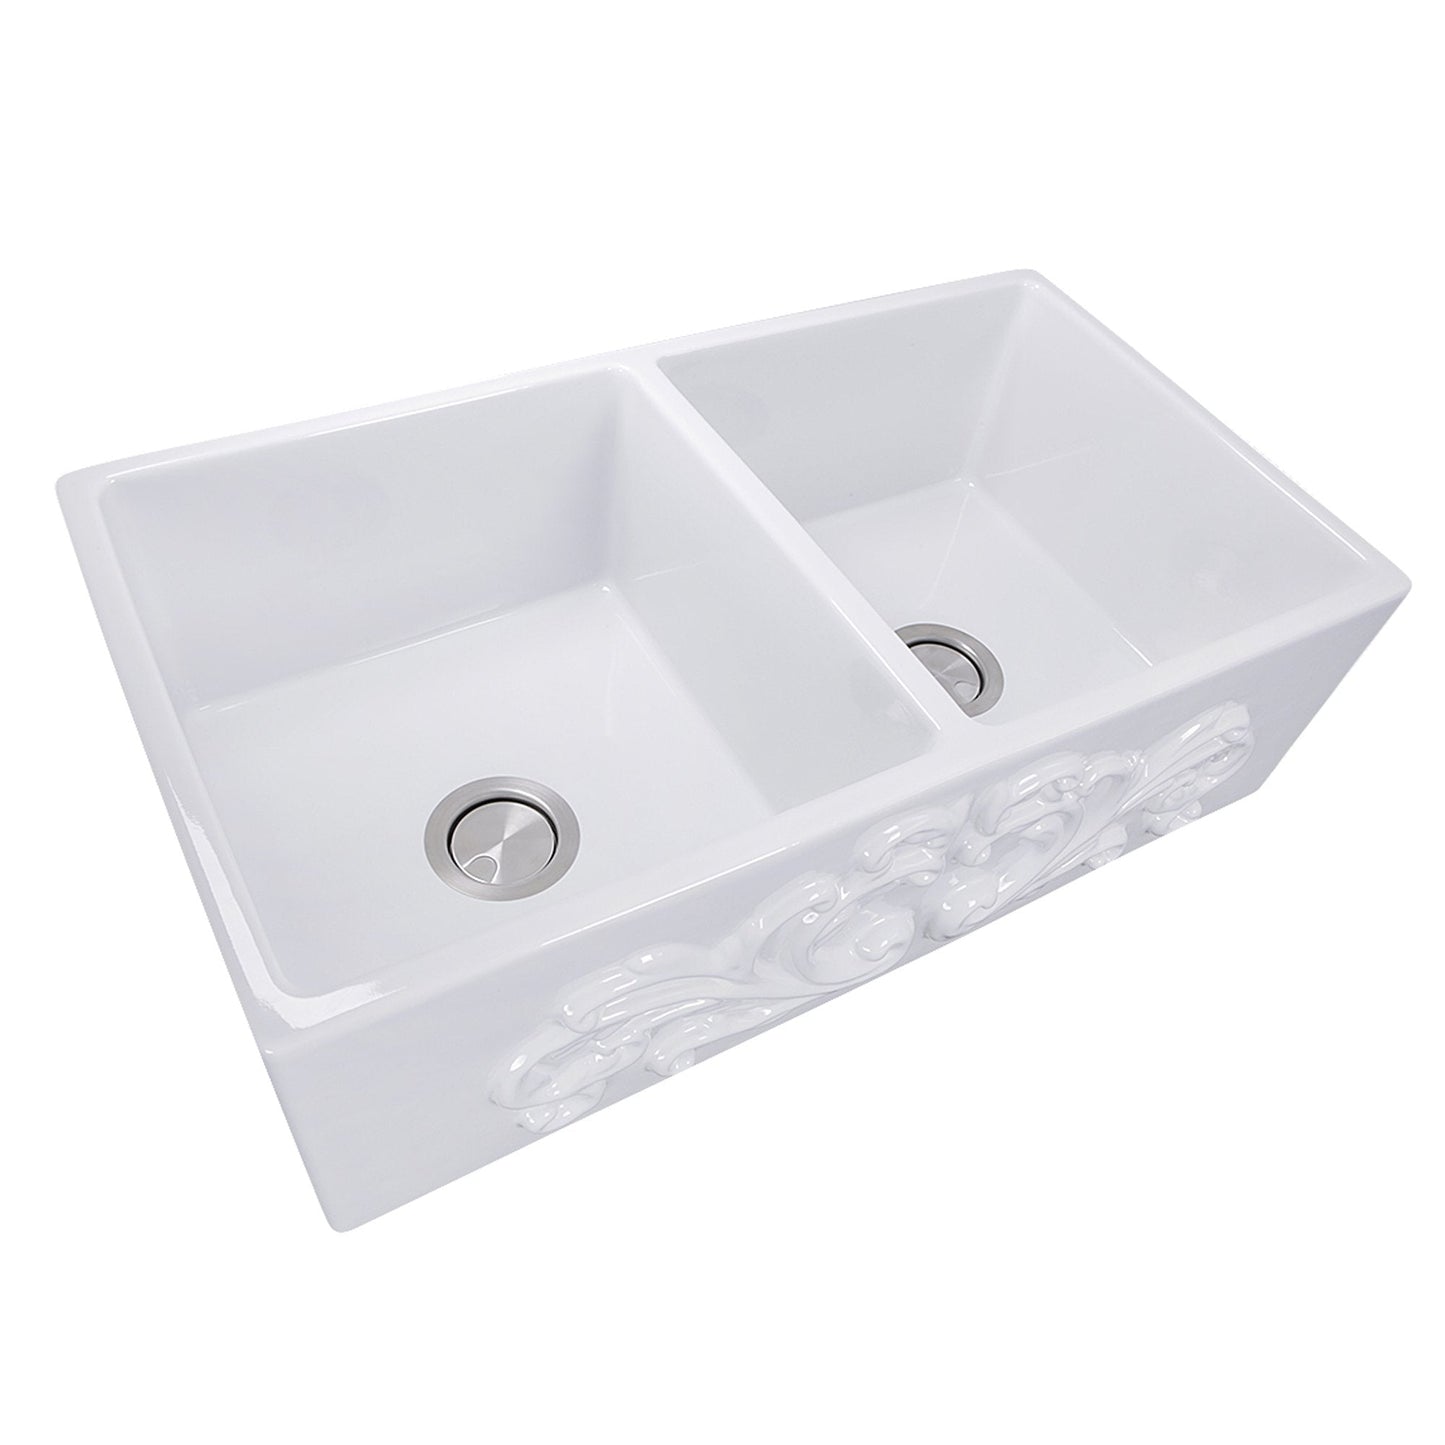 Nantucket 33" Double Bowl Farmhouse Fireclay Sink with Filigree Apron - FCFS3318D-Filigree - Manor House Sinks